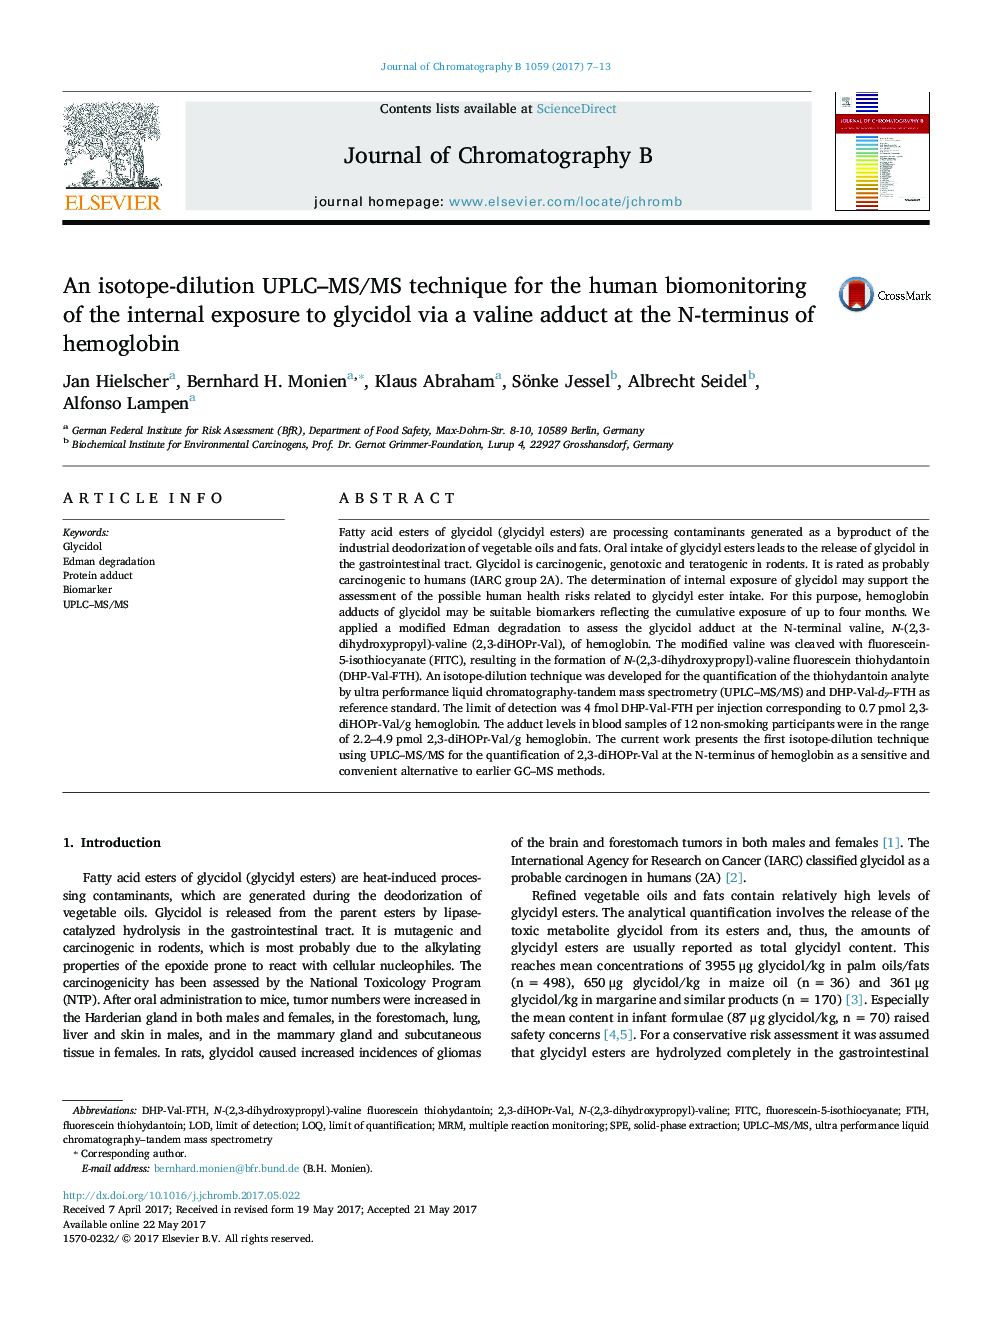 An isotope-dilution UPLC-MS/MS technique for the human biomonitoring of the internal exposure to glycidol via a valine adduct at the N-terminus of hemoglobin